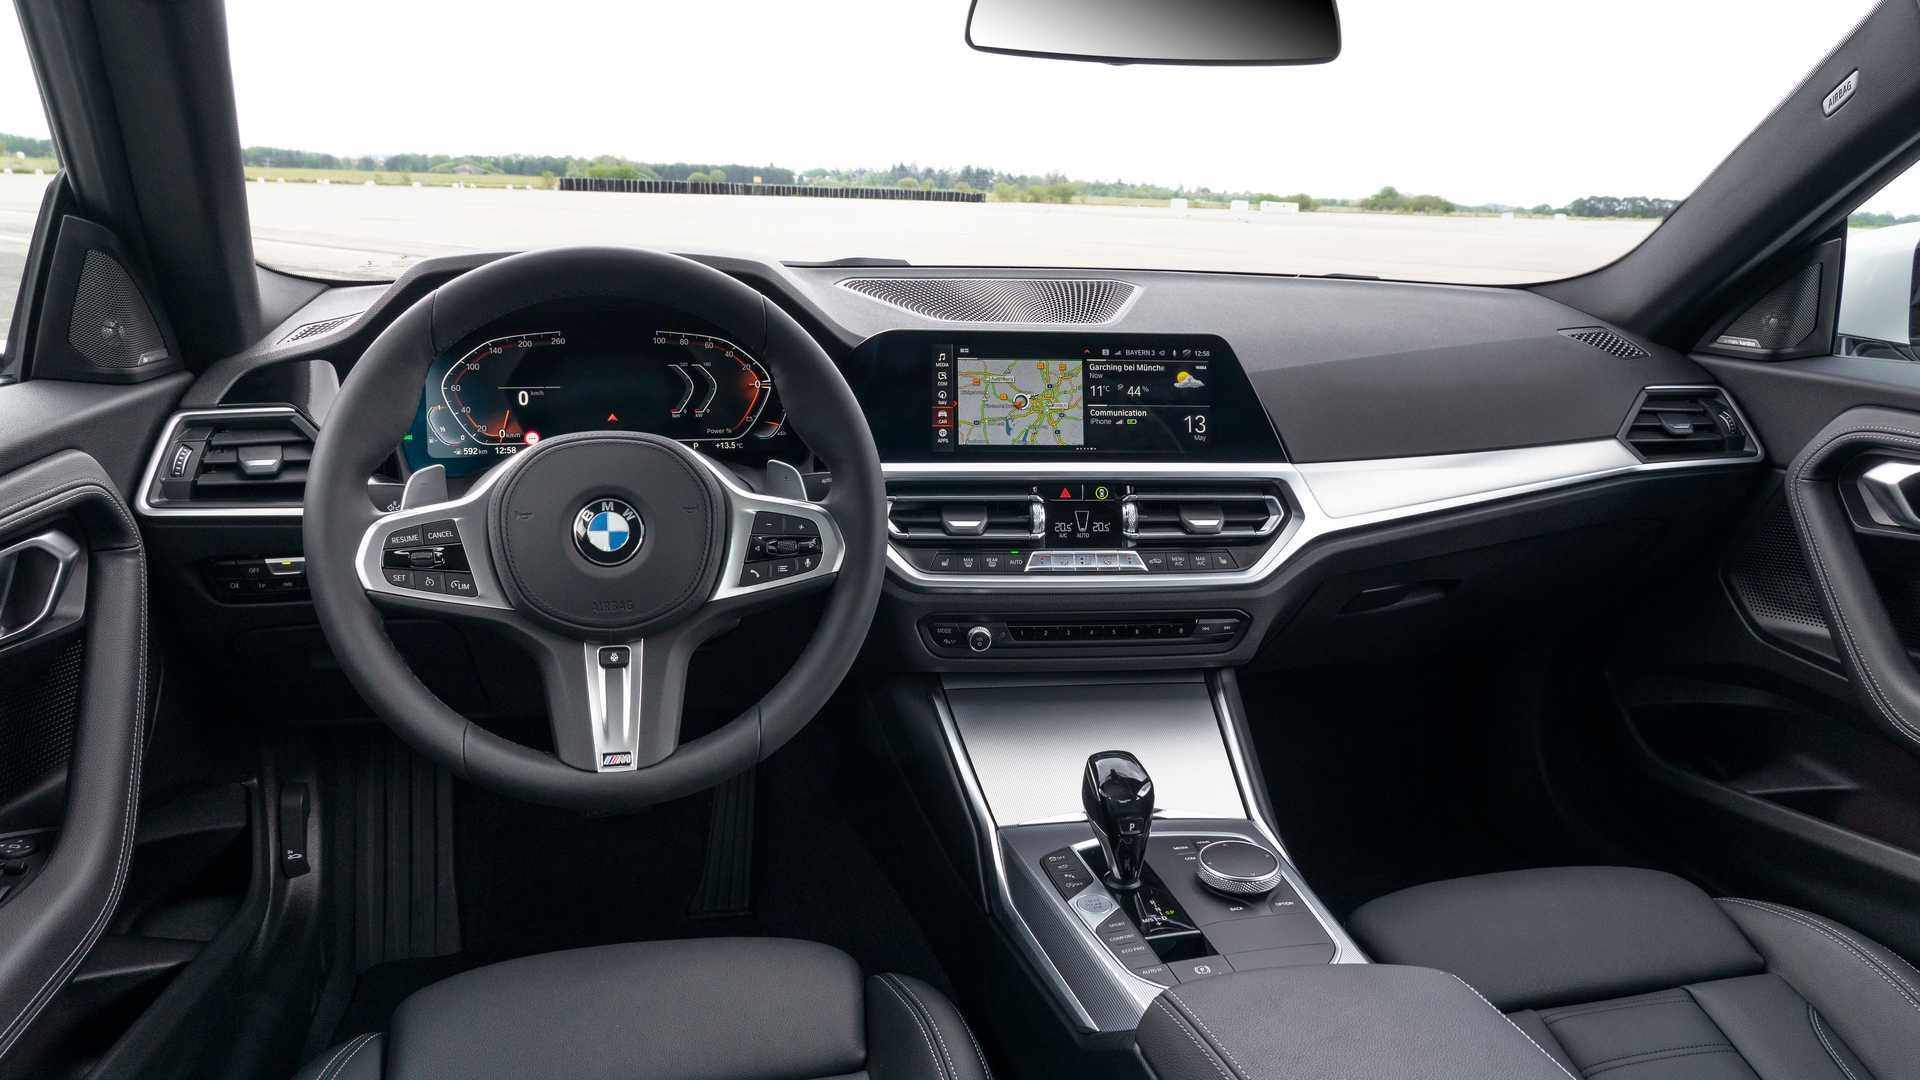 The BMW 2-Series Convertible's Interior